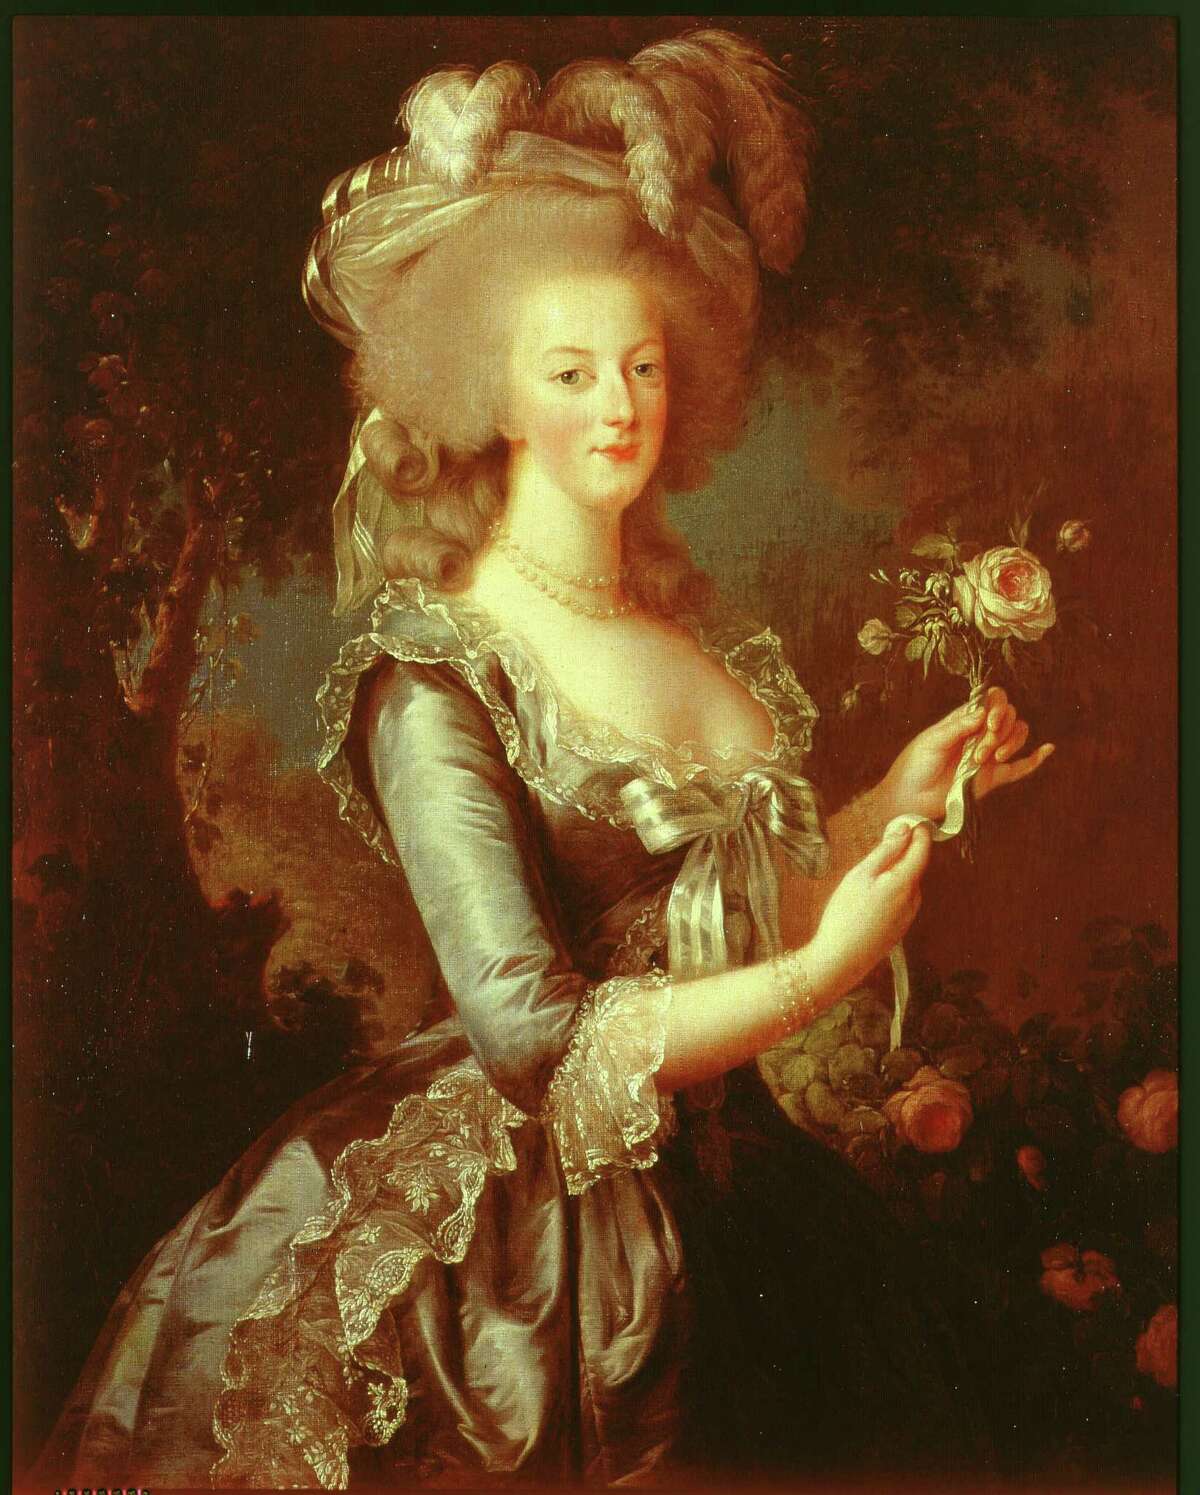 Marie Antoinette ﻿was born an archduchess of Austria who became the last queen of France﻿. She was executed in 1793.